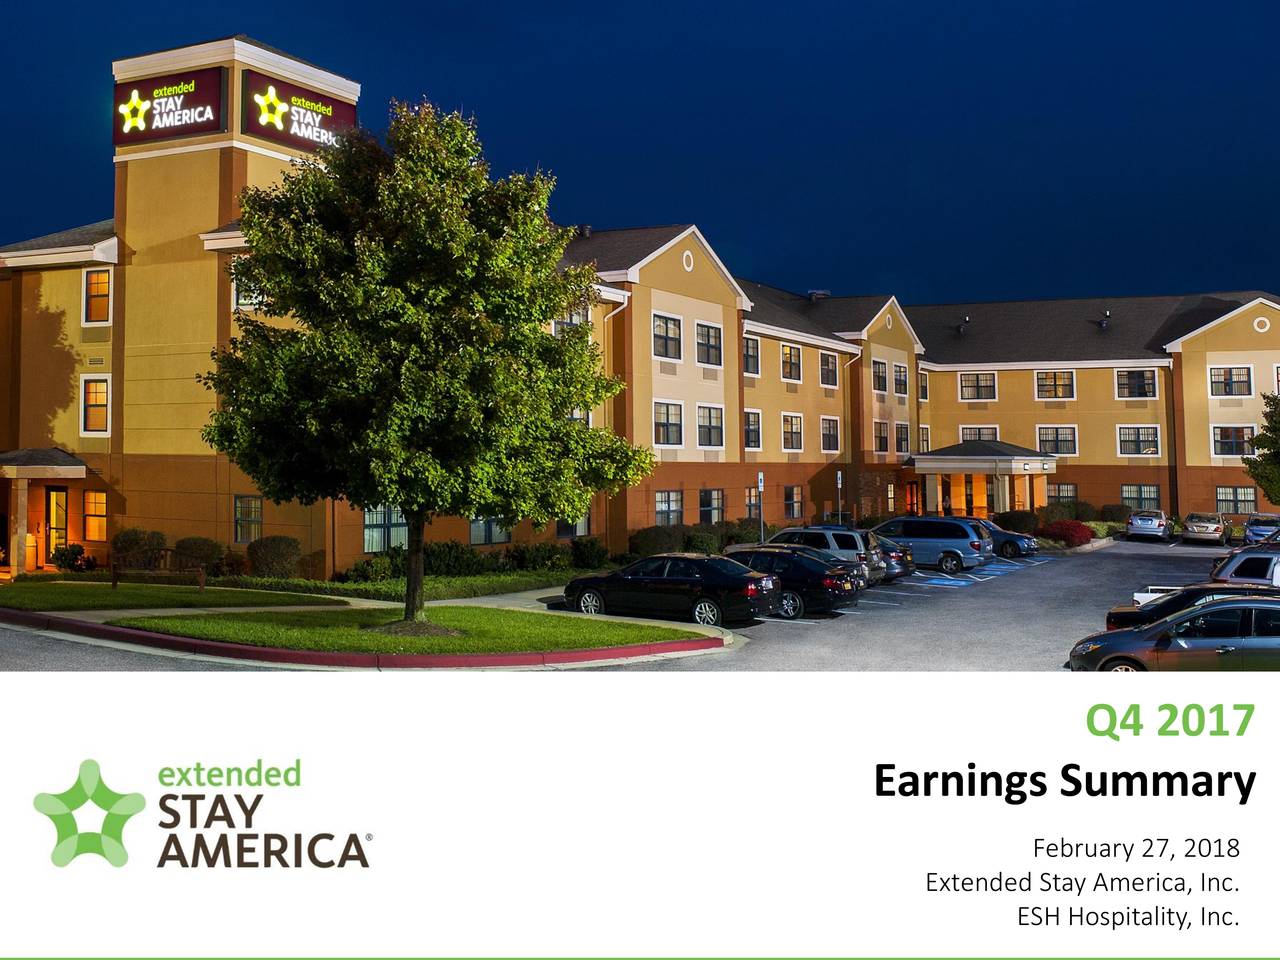 extended stay america